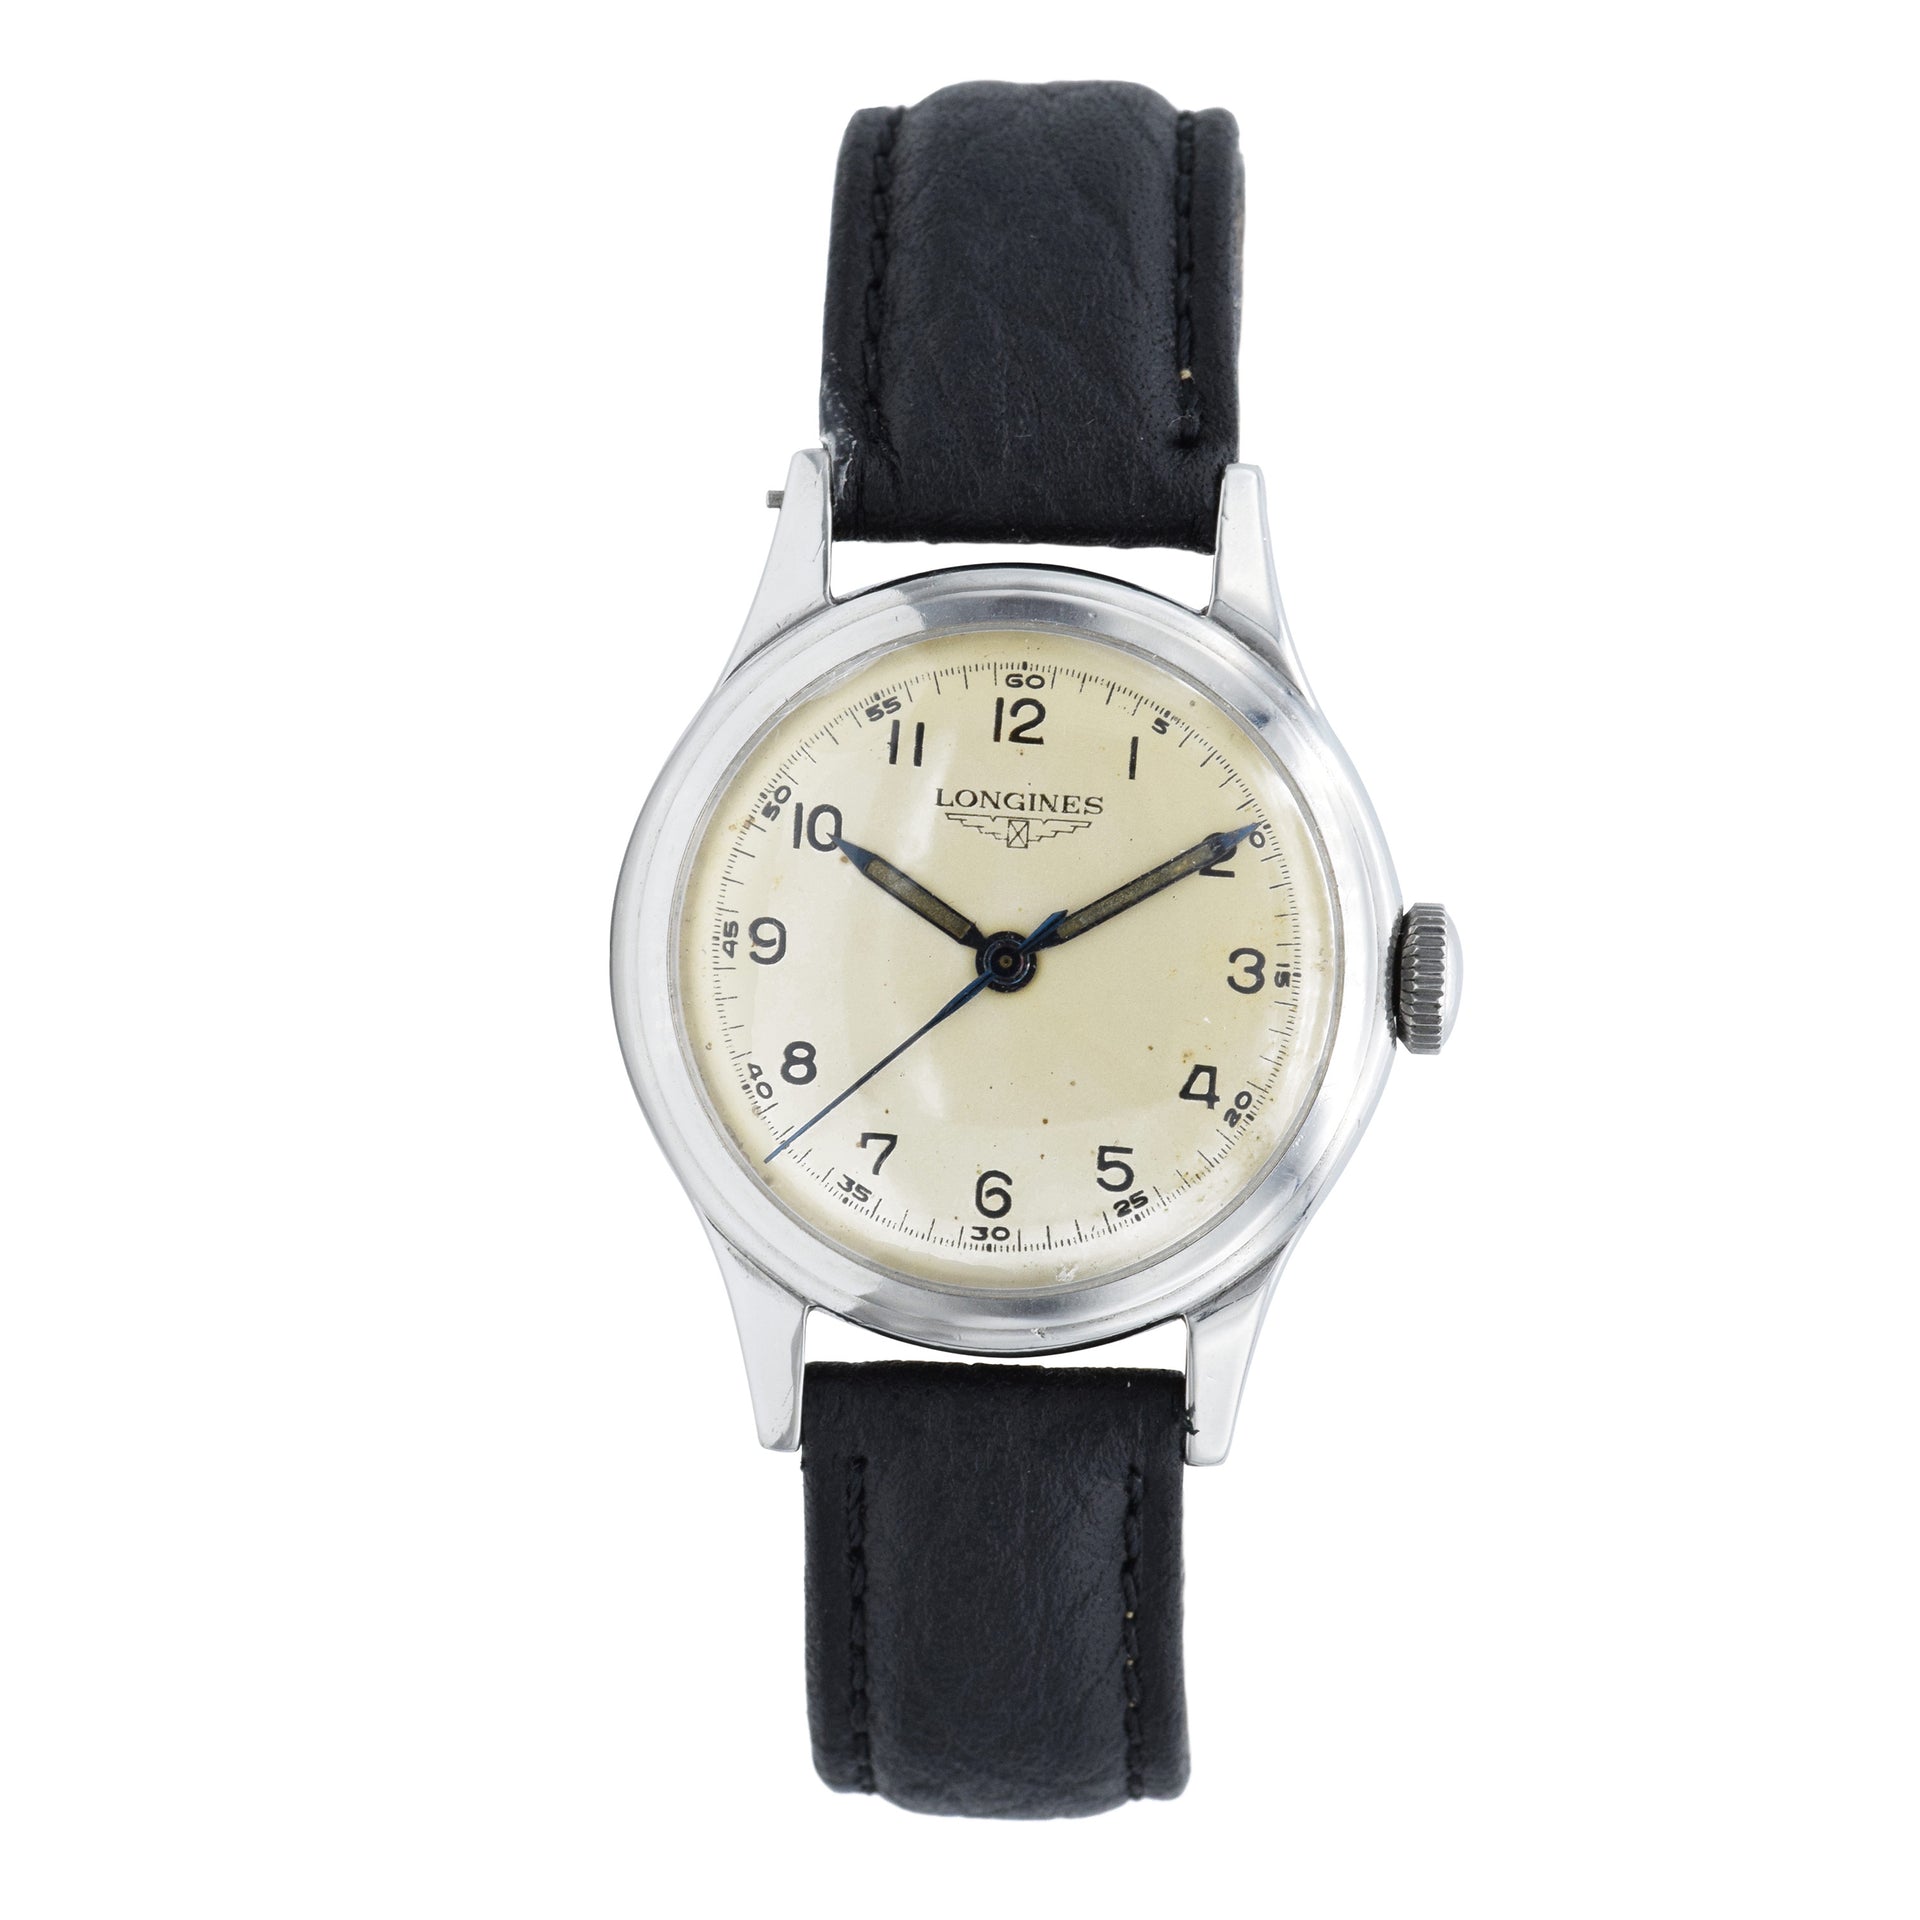 Vintage 1950s Longines Military Watch